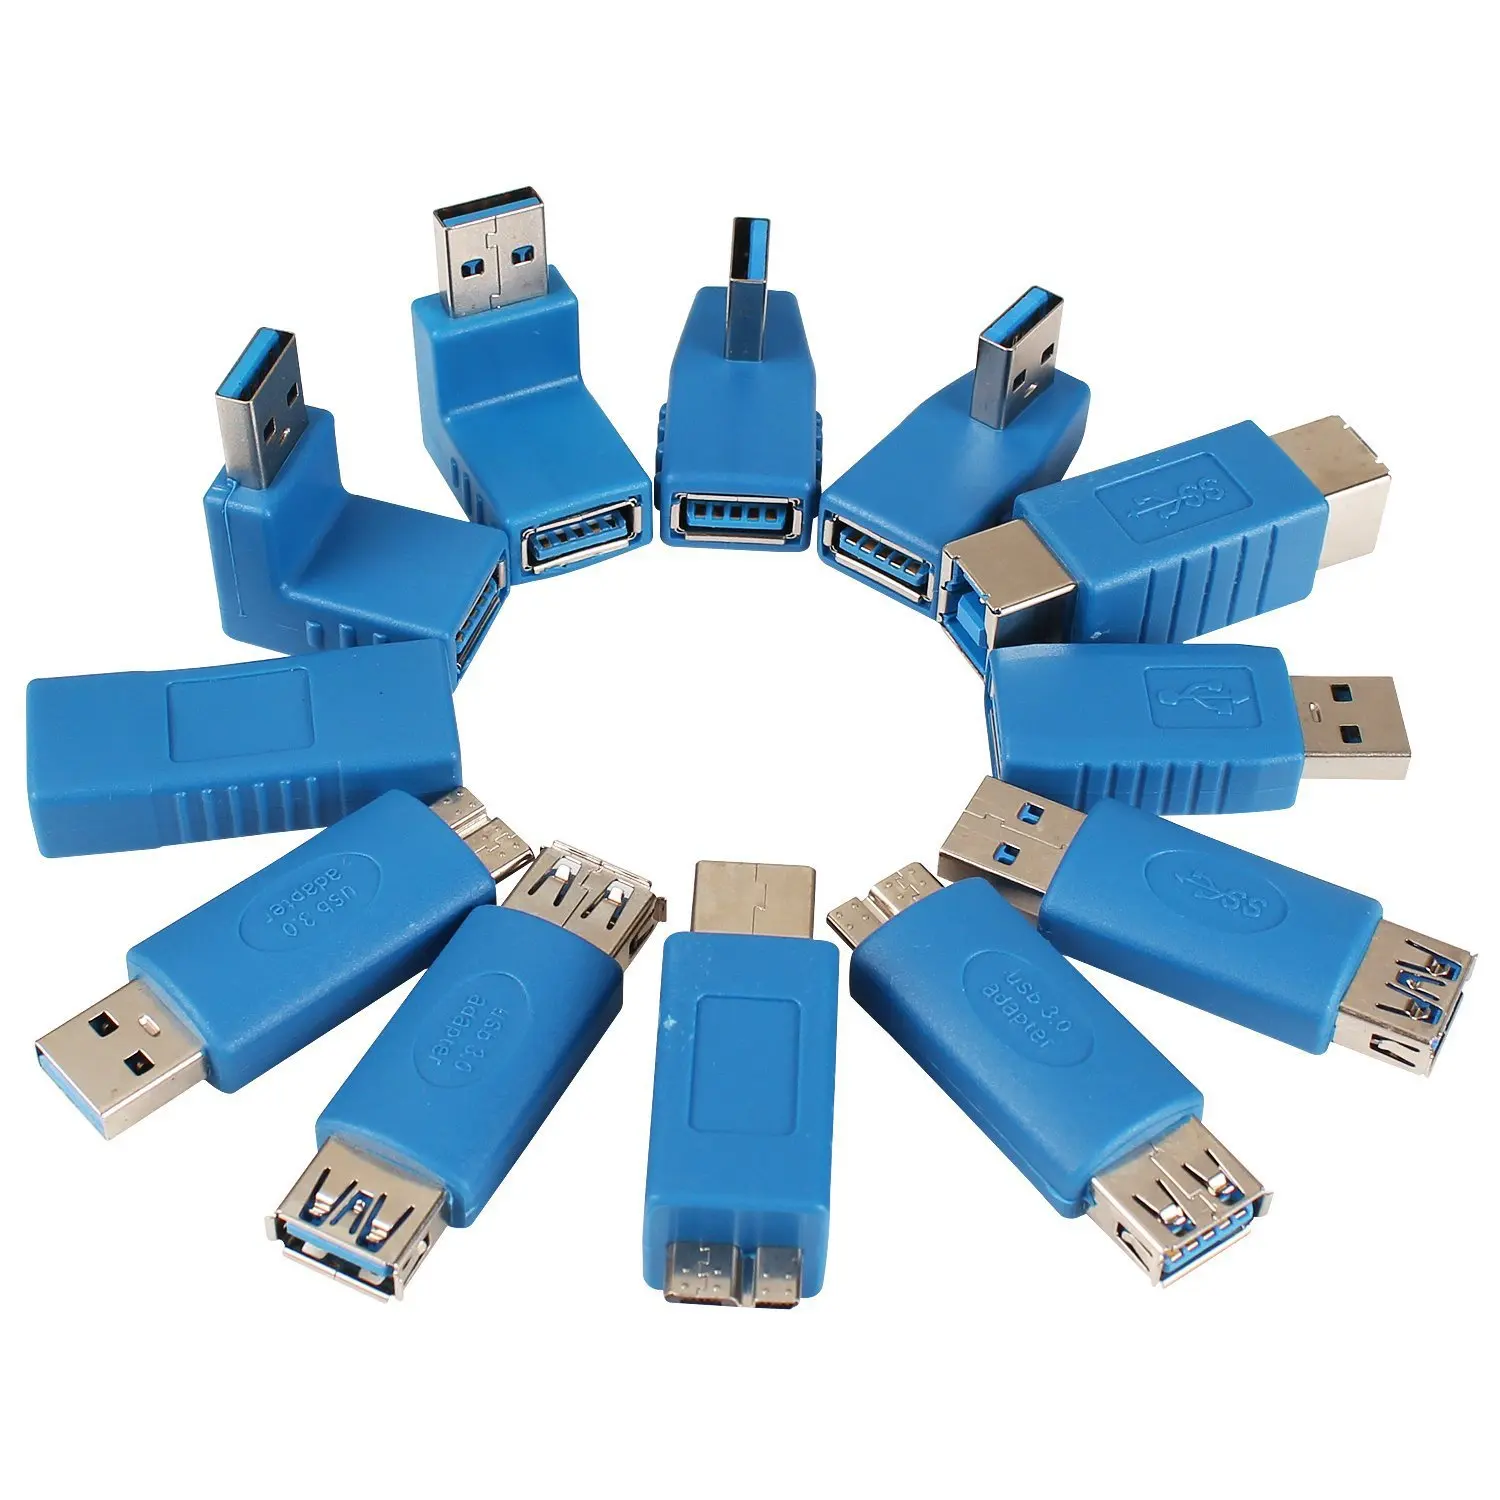 

12pcs/set USB3.0 Adapter Couplers Type A to B or Micro or Mini And Male to Female Adapters USB male to Female Right Degree